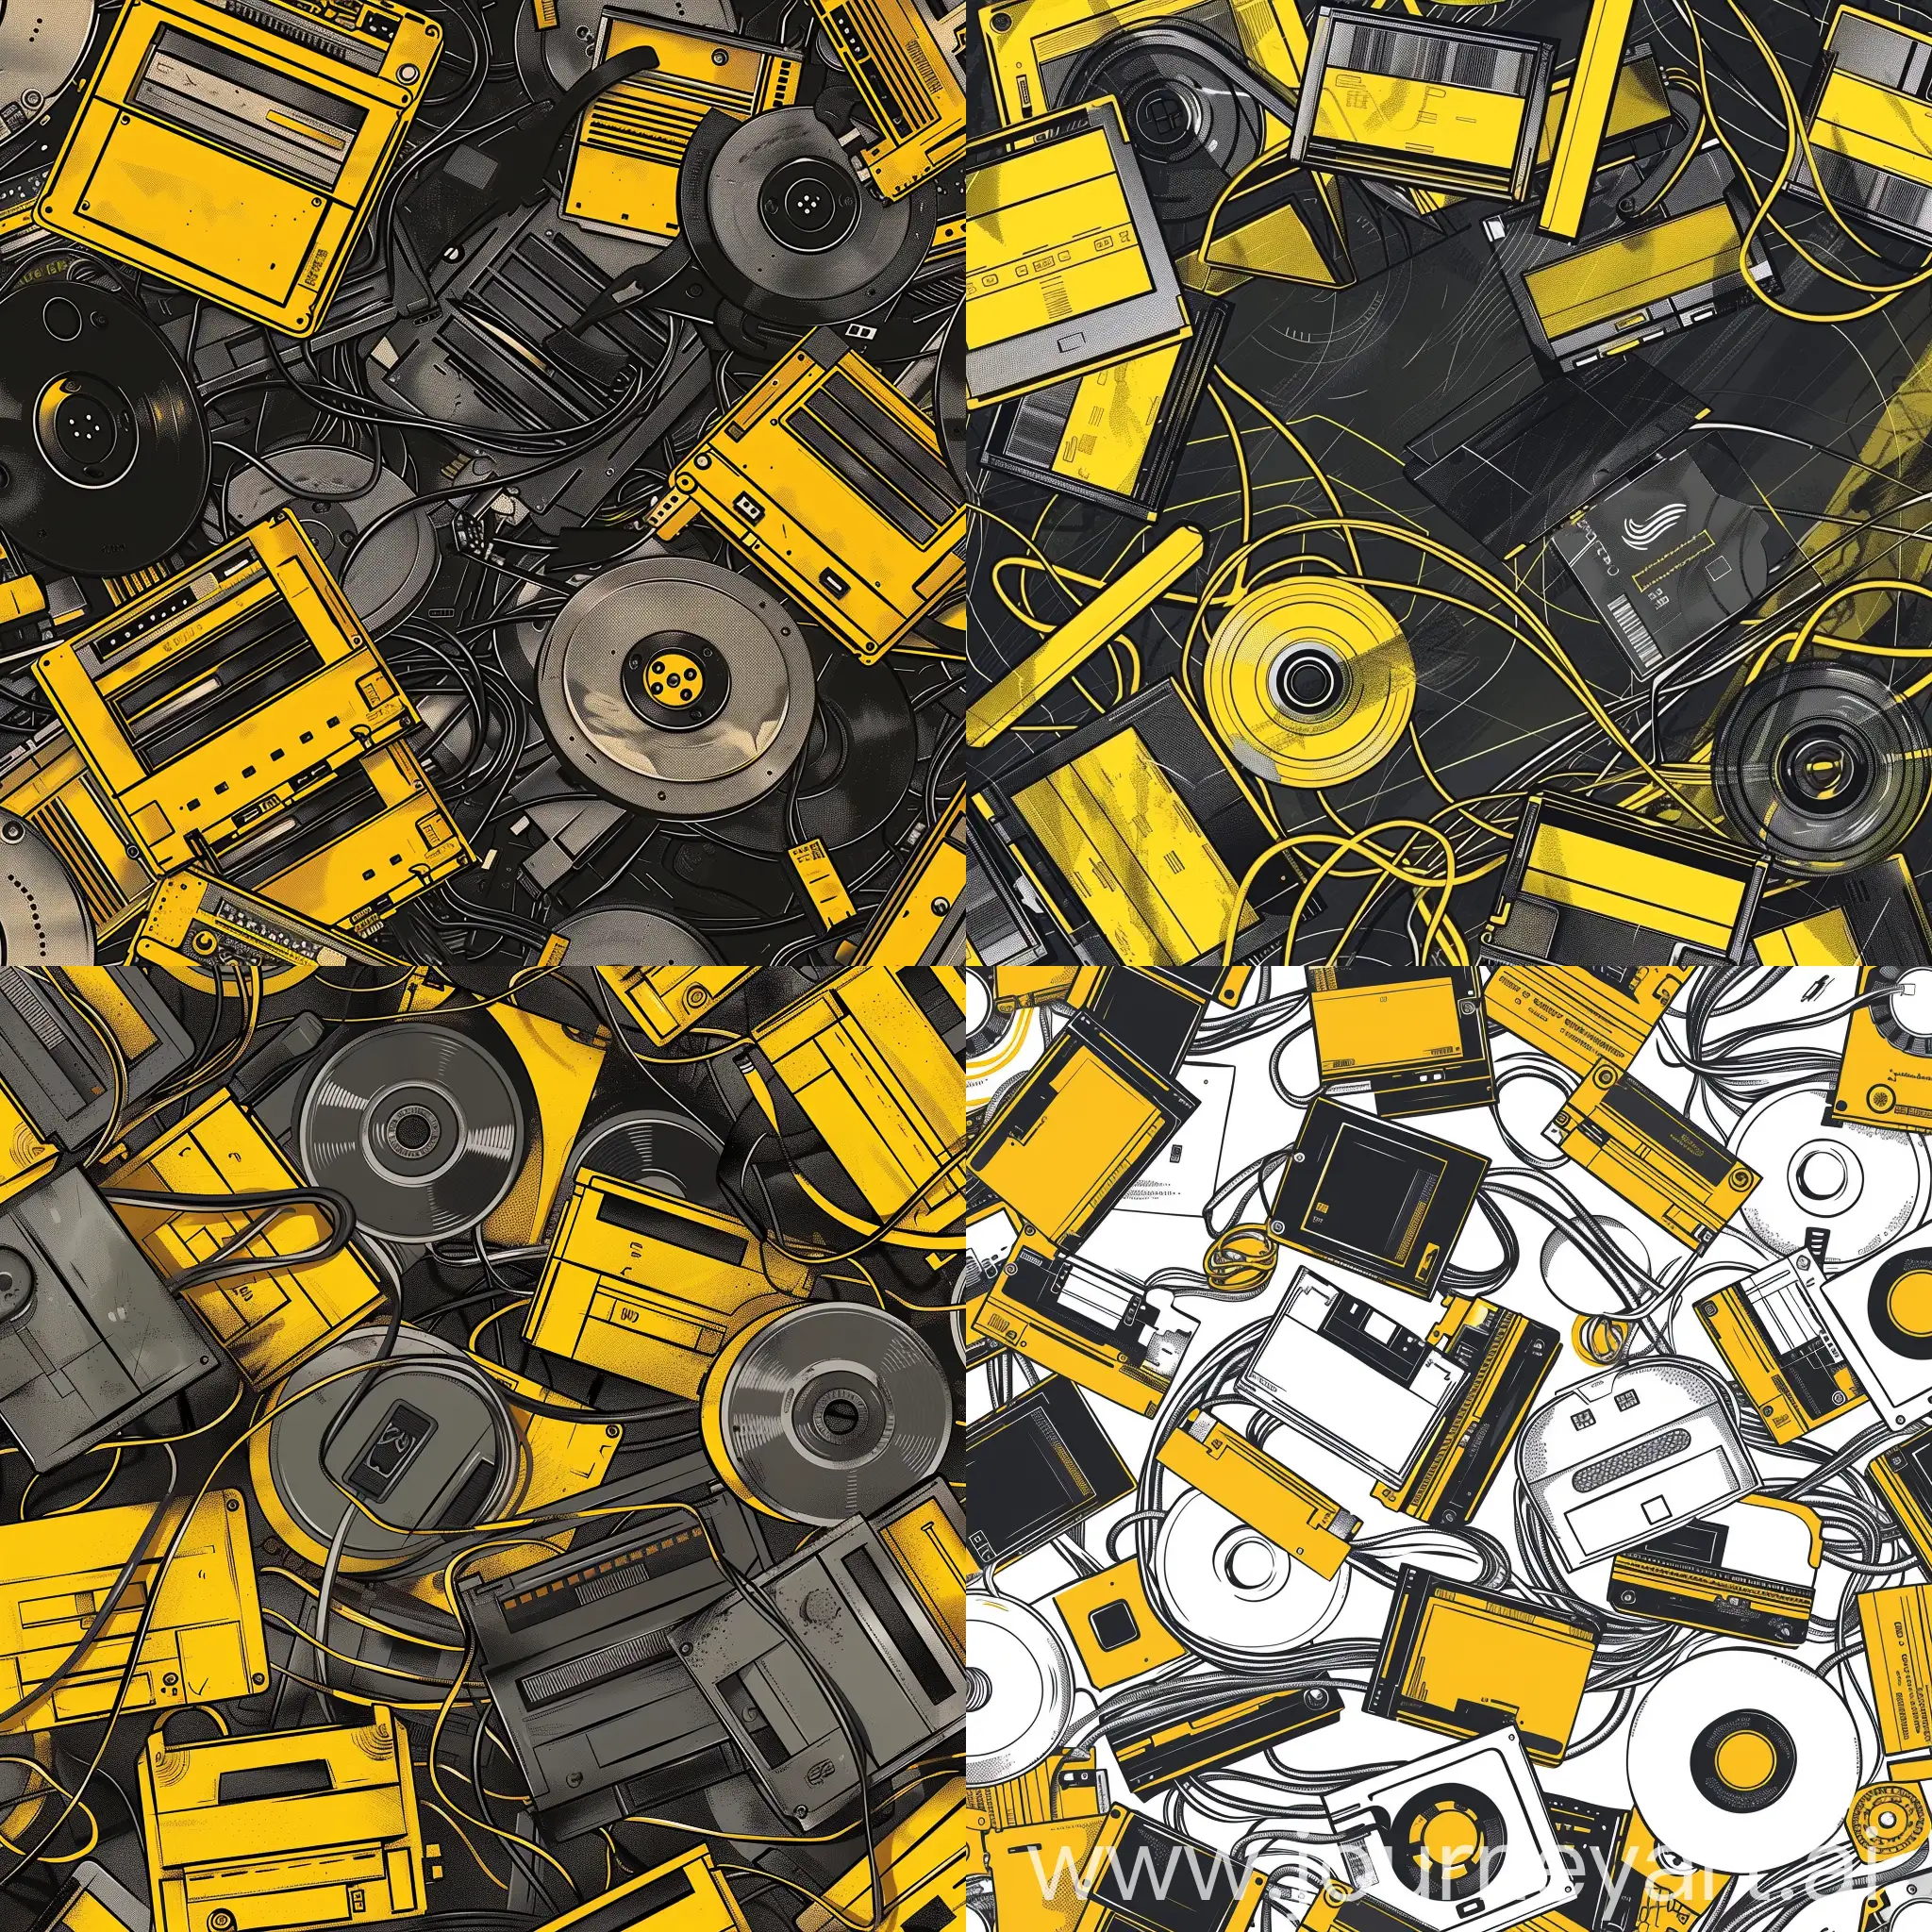 Vintage-Computing-Equipment-Sketch-Floppy-Disks-HDDs-and-Wires-in-Yellow-and-Black